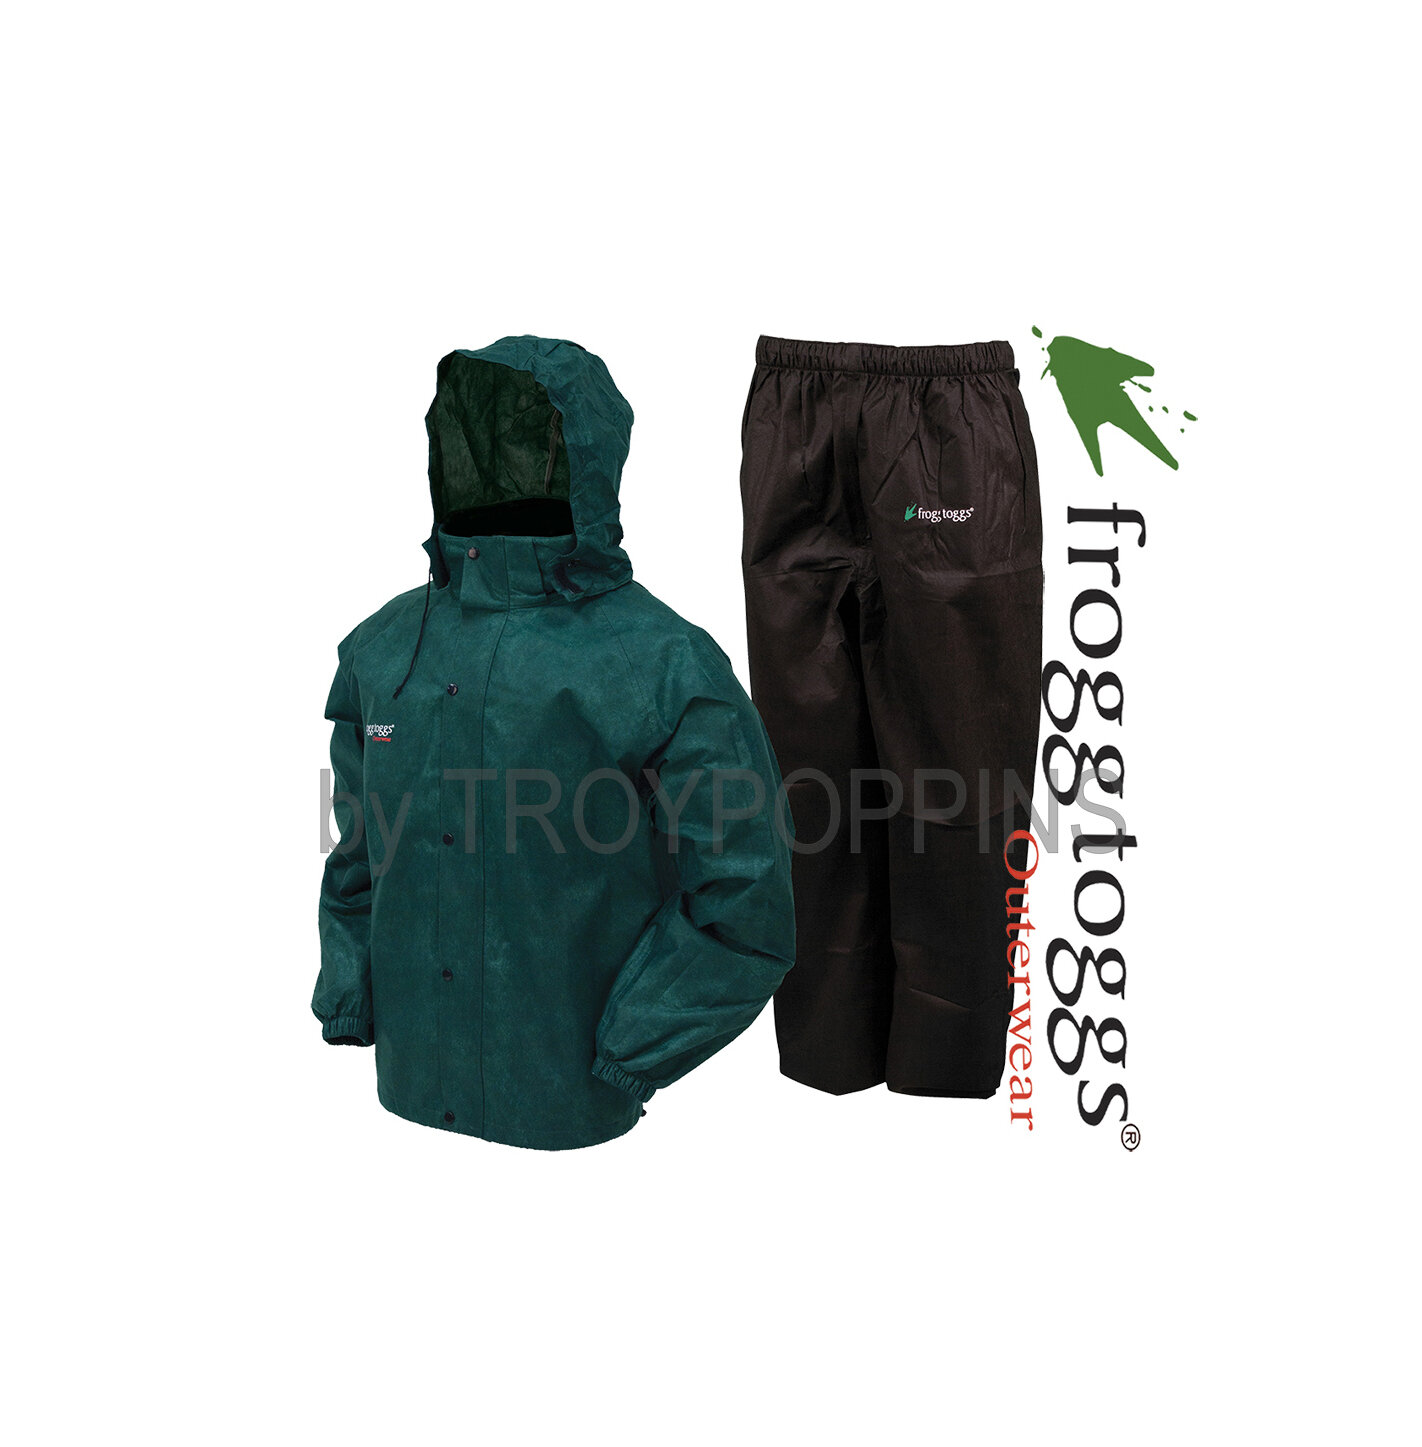 NEW FROGG TOGGS AS1310-109 All Sport Rain Suit GREEN/BLACK XL 